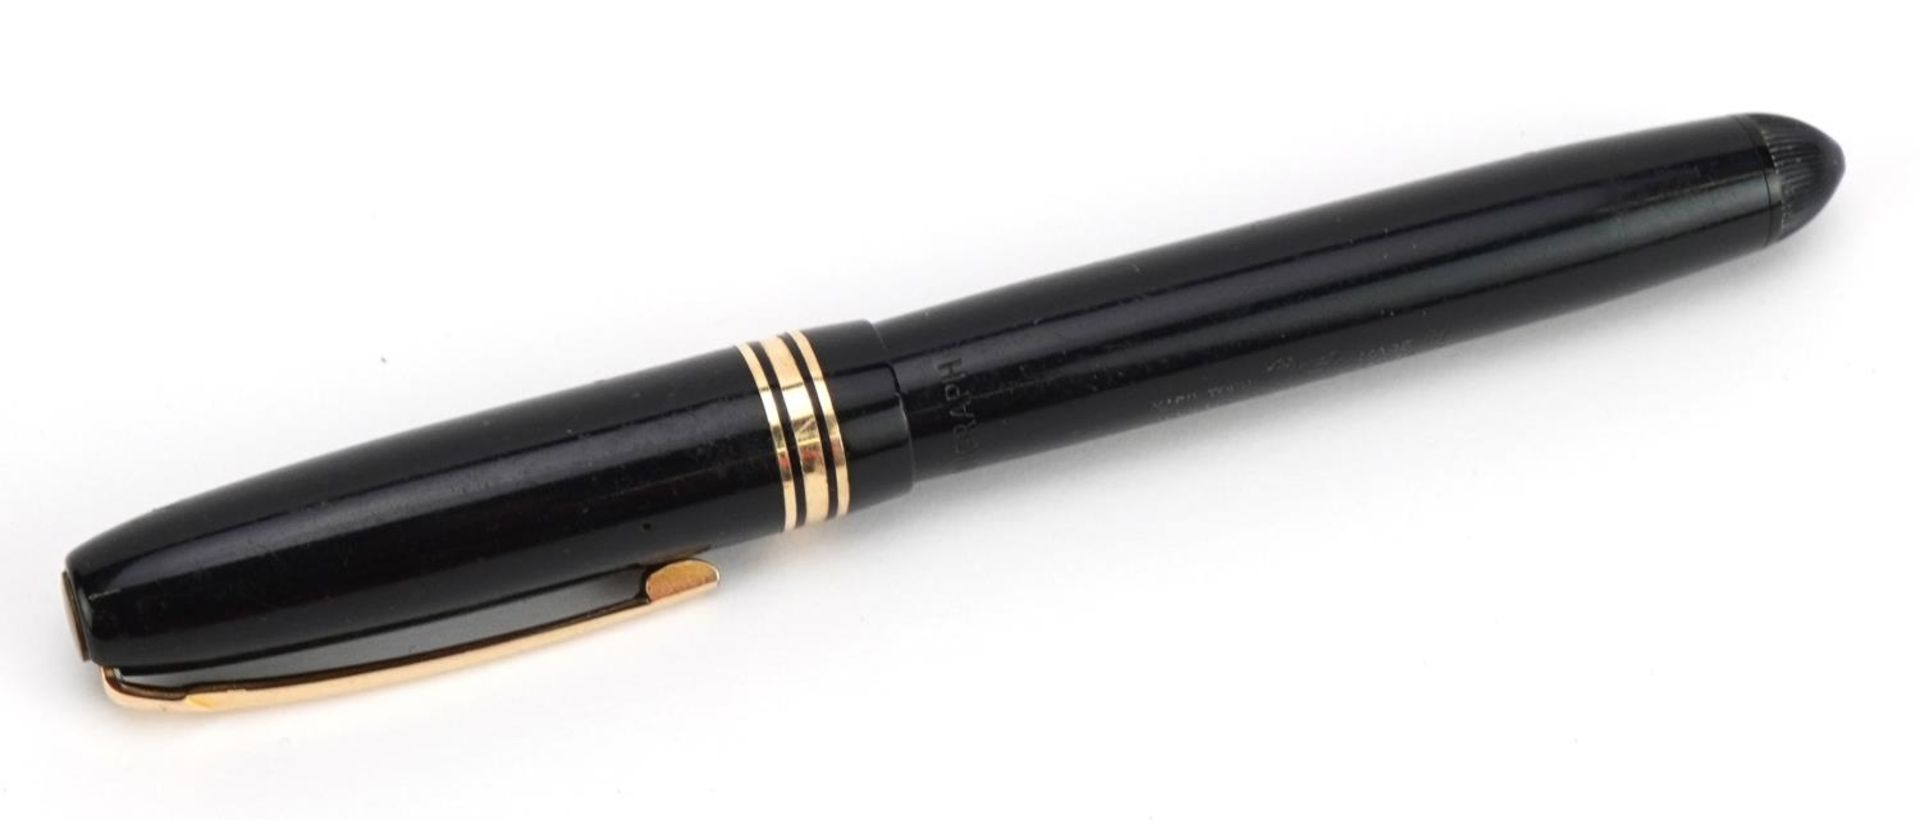 Swan Mabie Todd & Co fountain pen with 14ct gold nib - Image 3 of 4